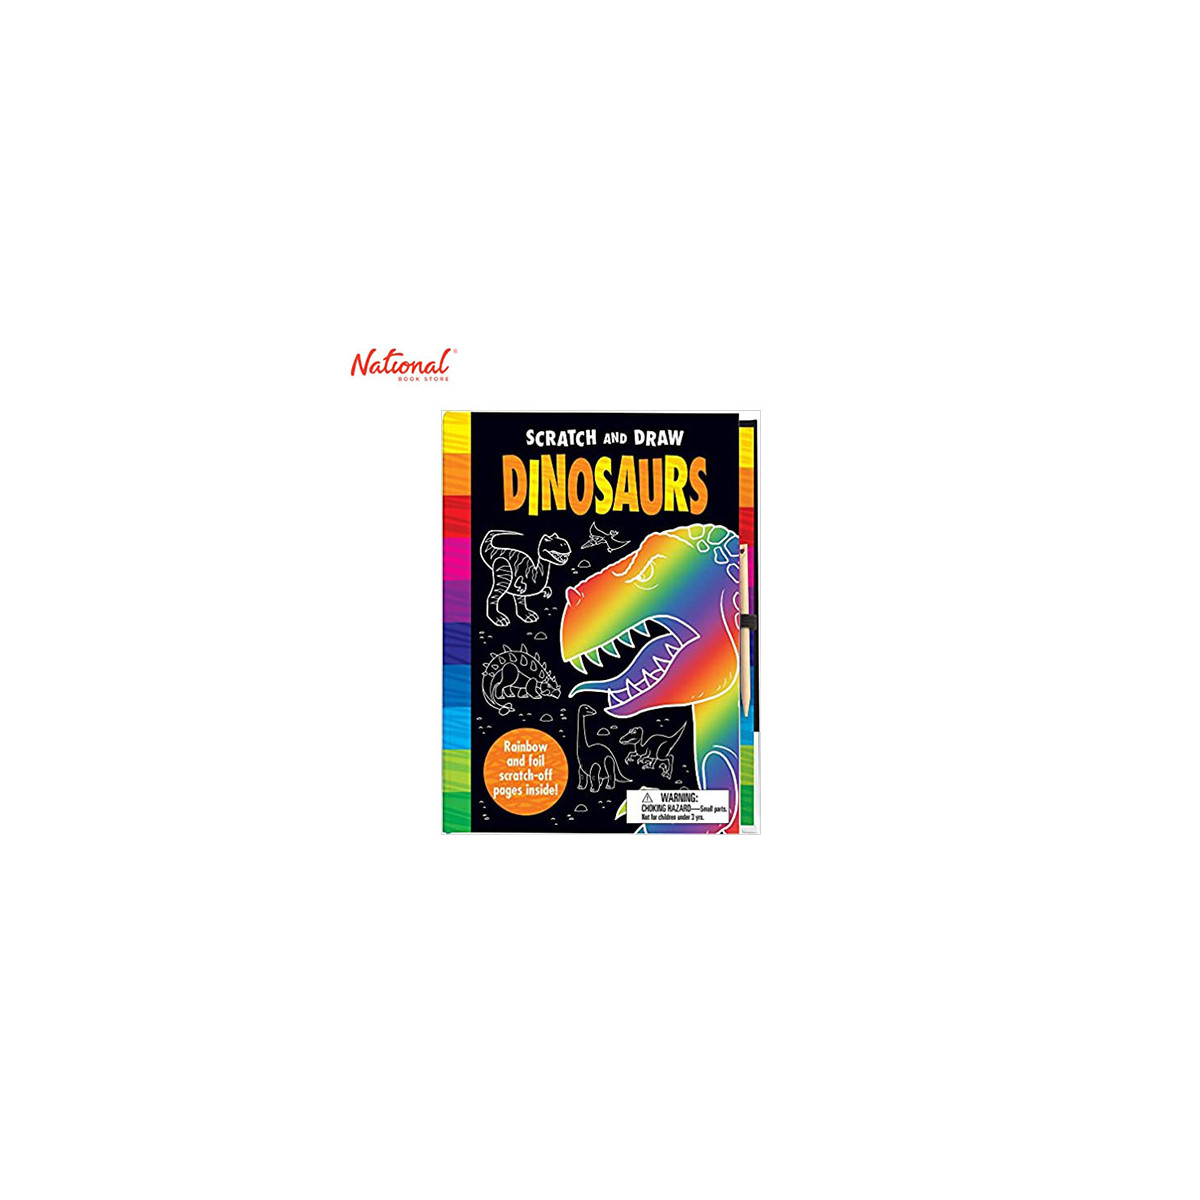 SCRATCH AND DRAW DINOSAURS CK HARDCOVER